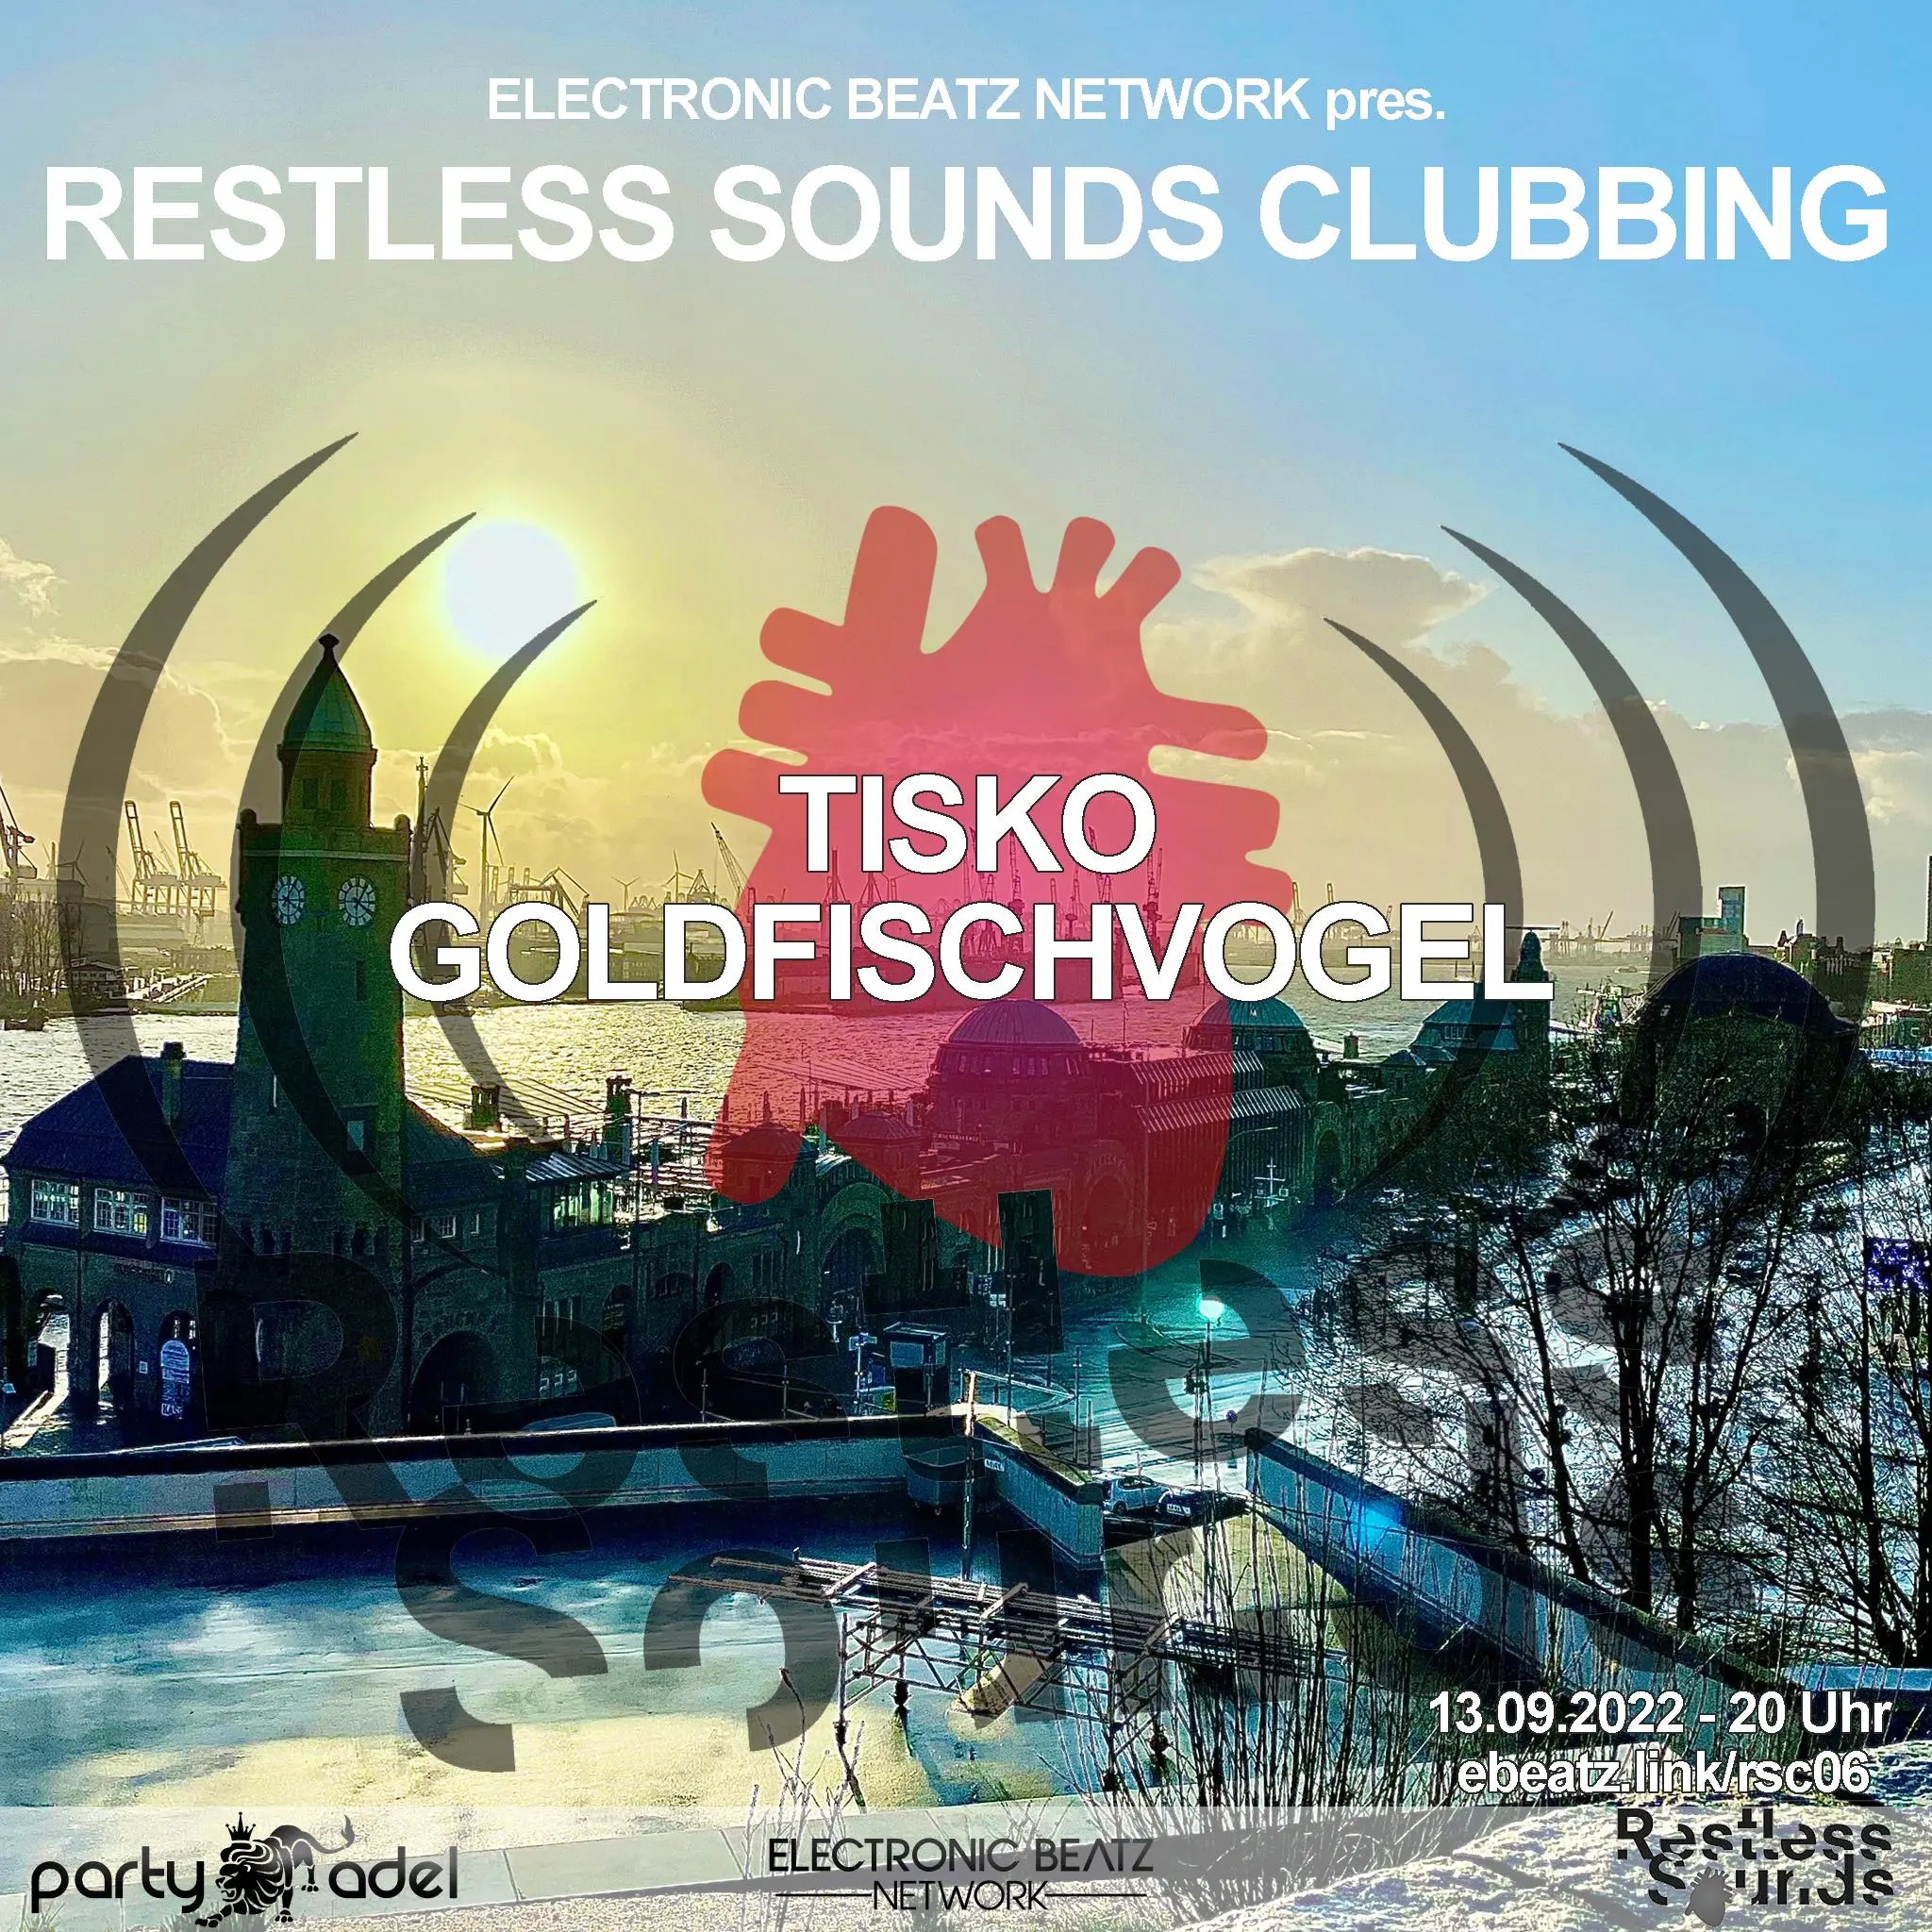  Restless Sounds Clubbing (13.09.2022)